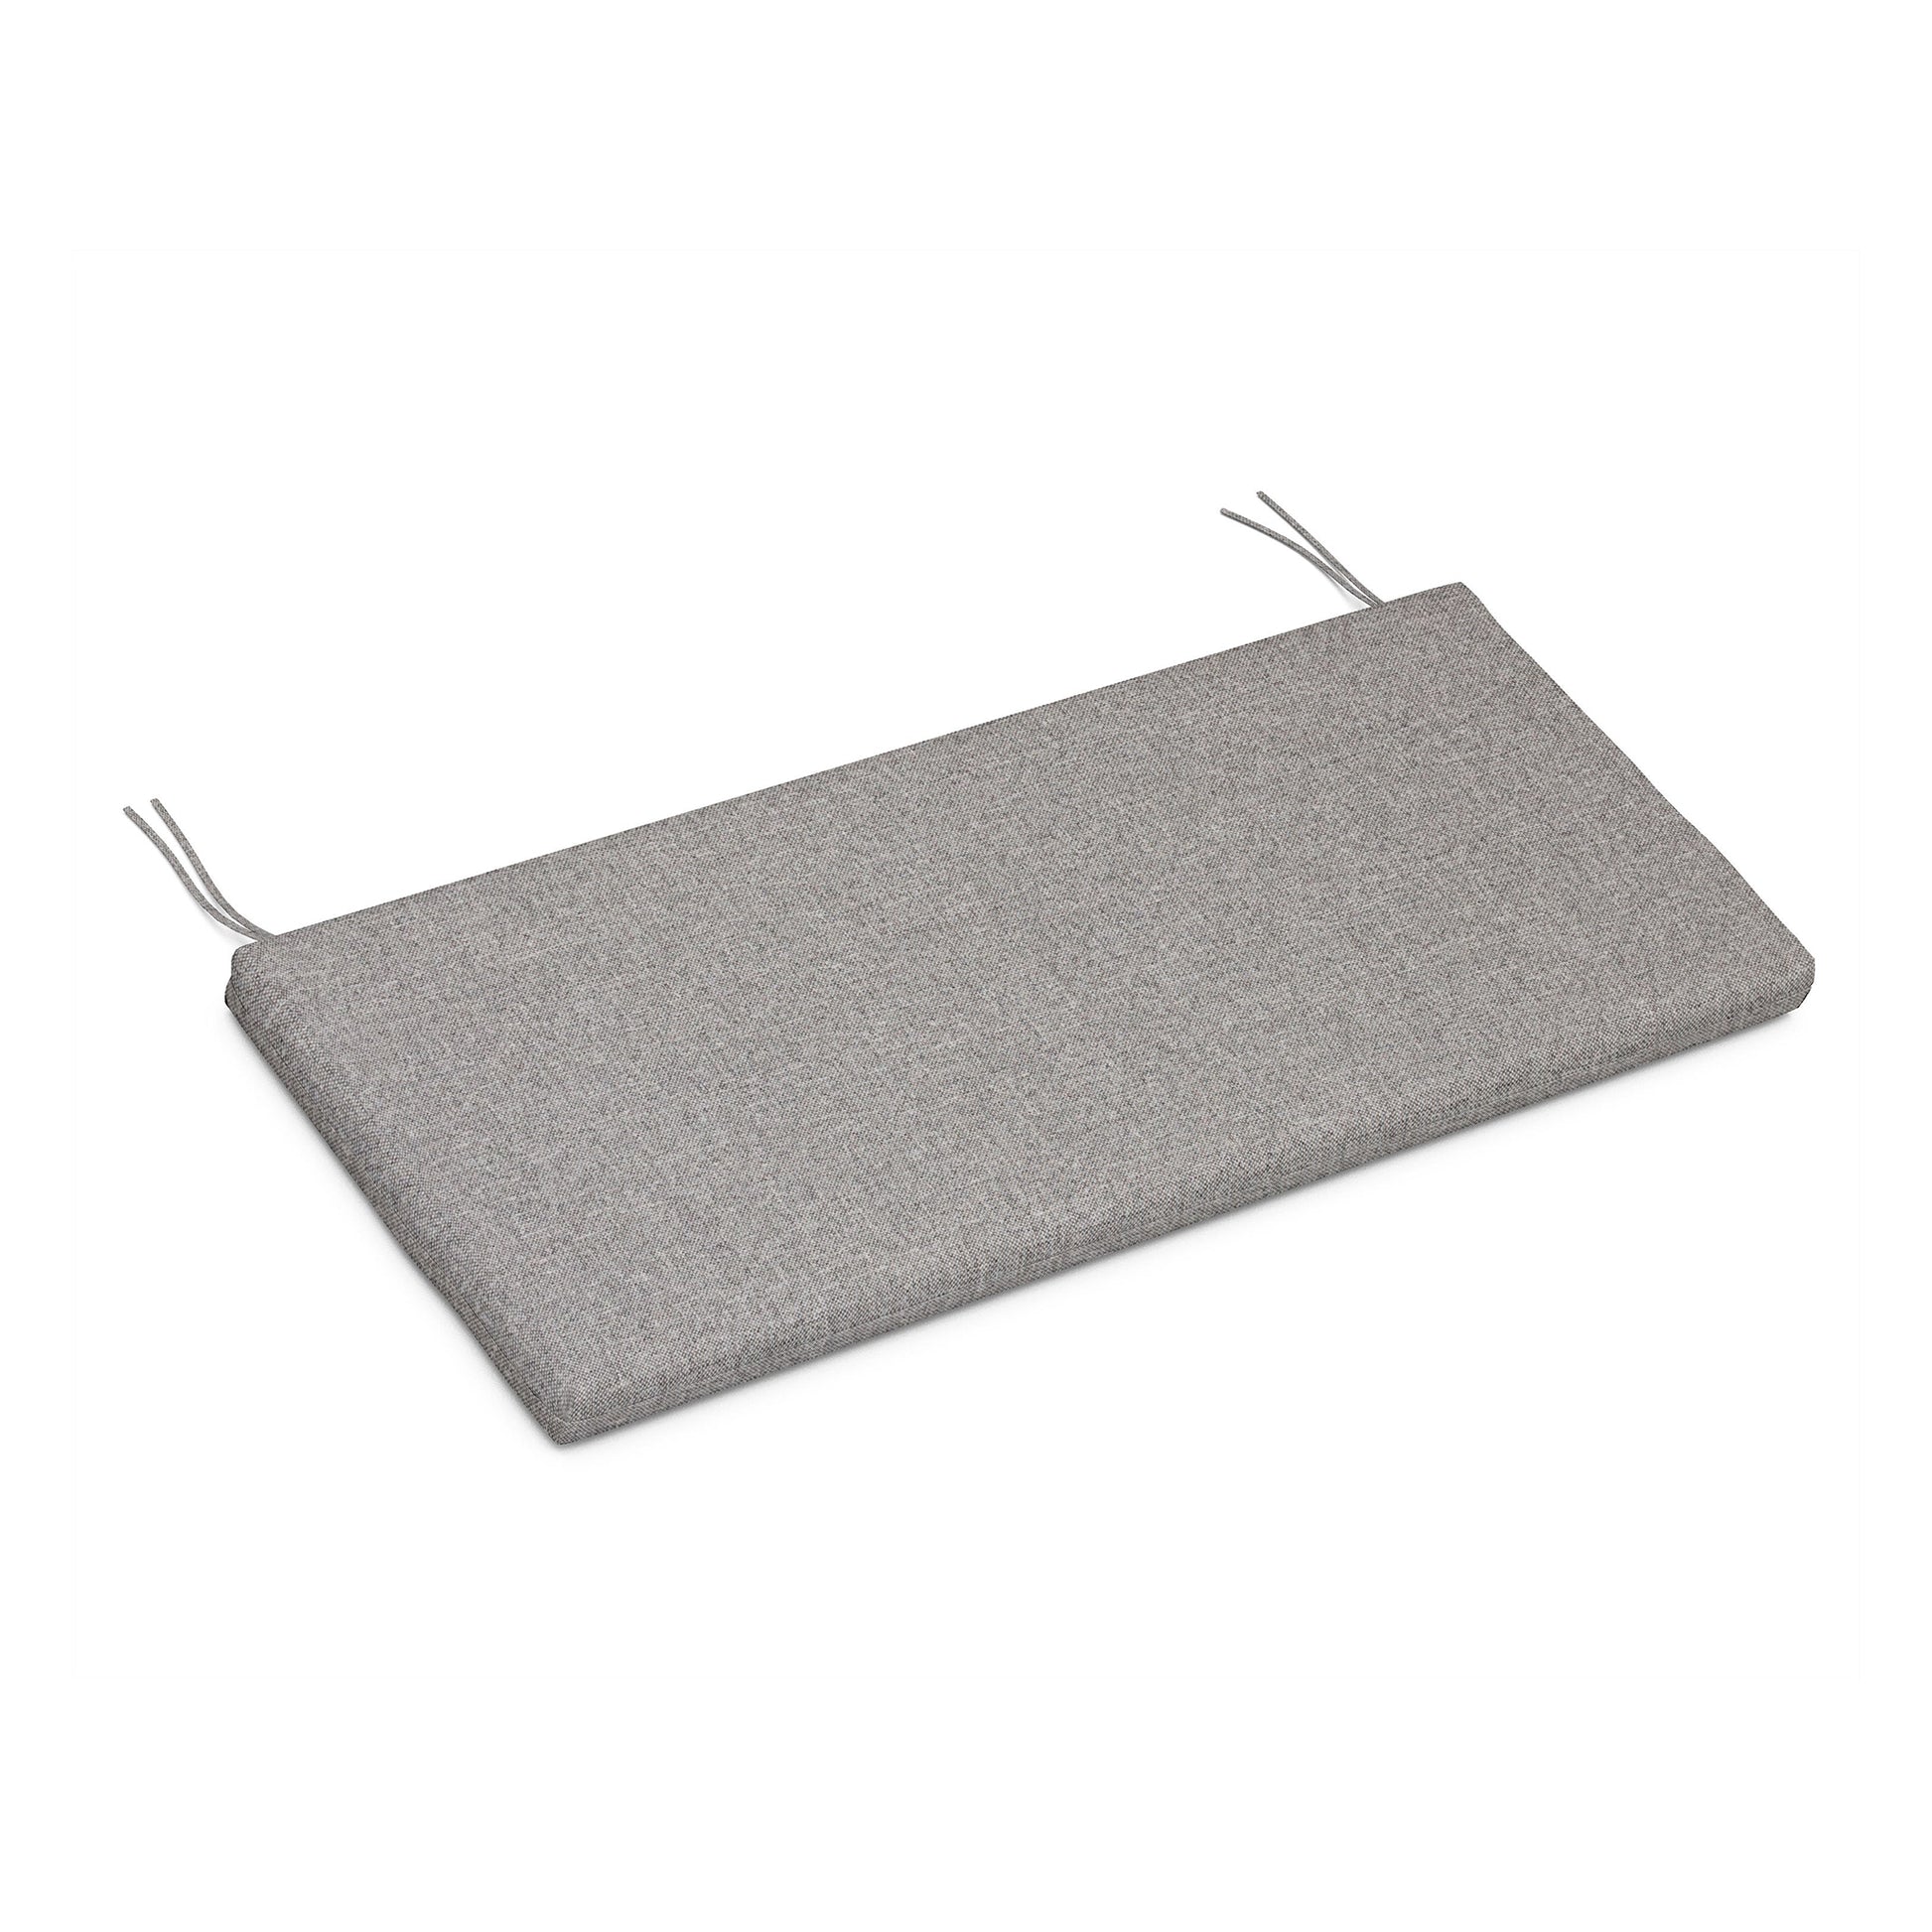 A gray POLYWOOD® XPWS0060 - Seat Cushion with ties on each corner, isolated on a white background.